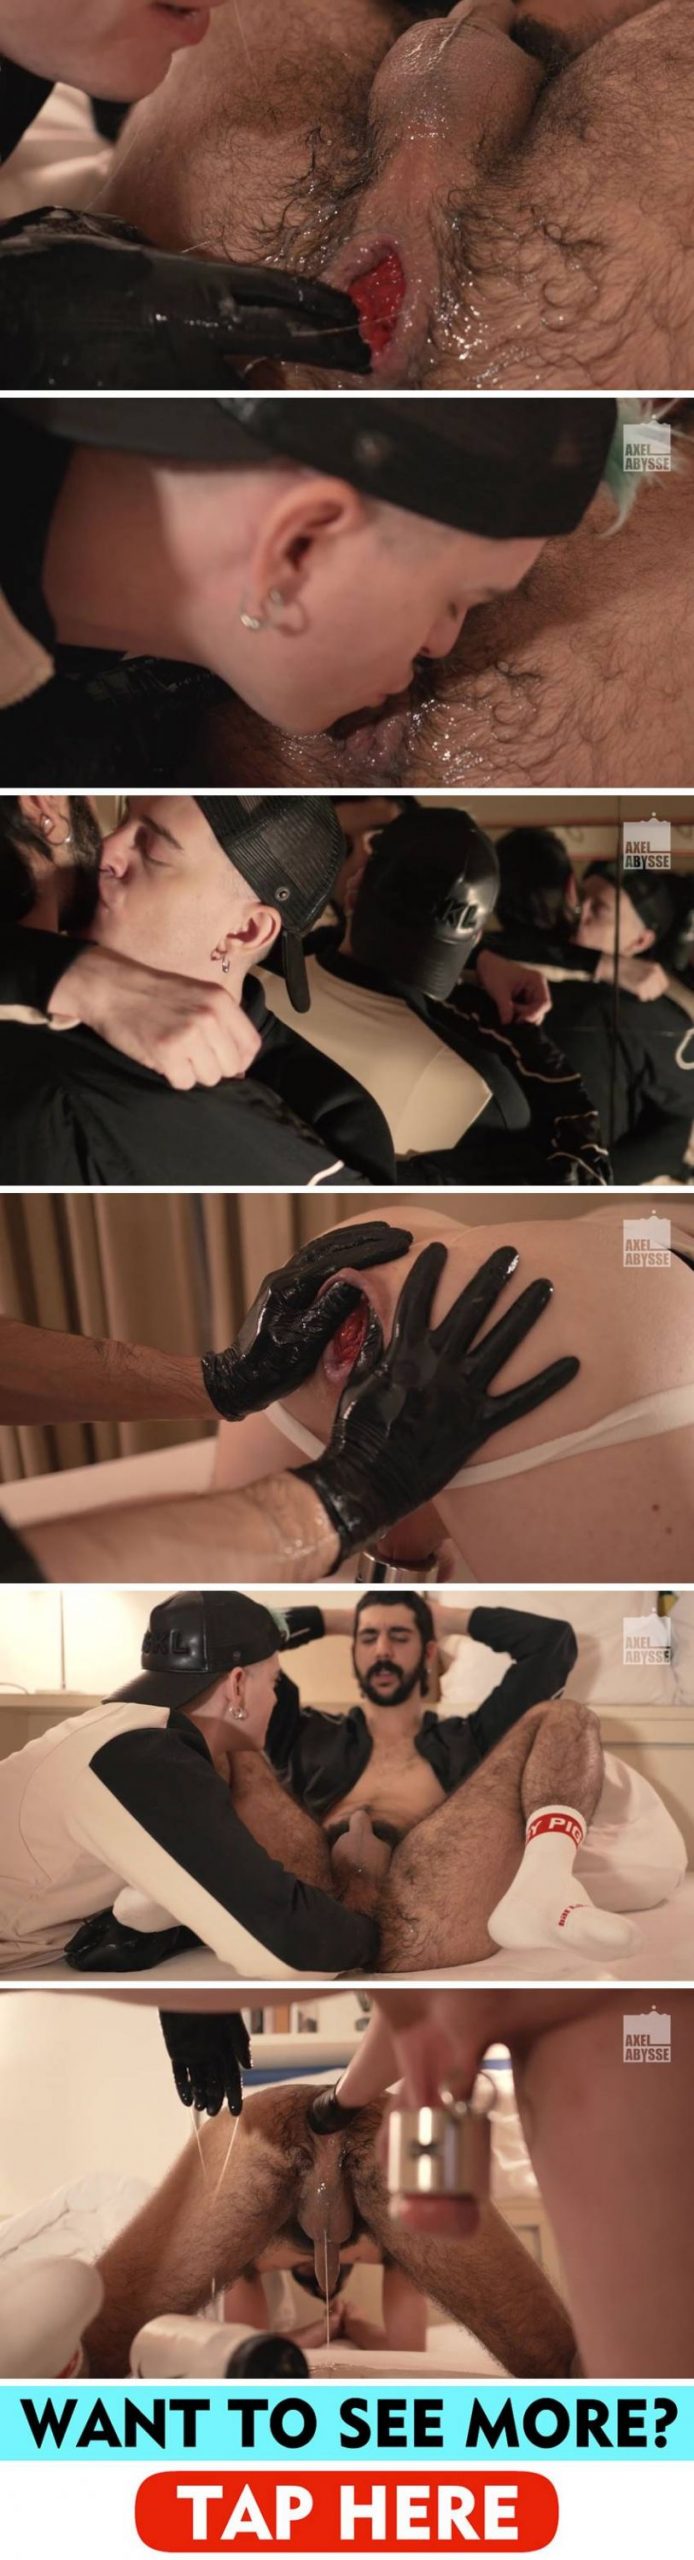 Leon Chevalier & Axel Abysse Fist Fuck Each Other